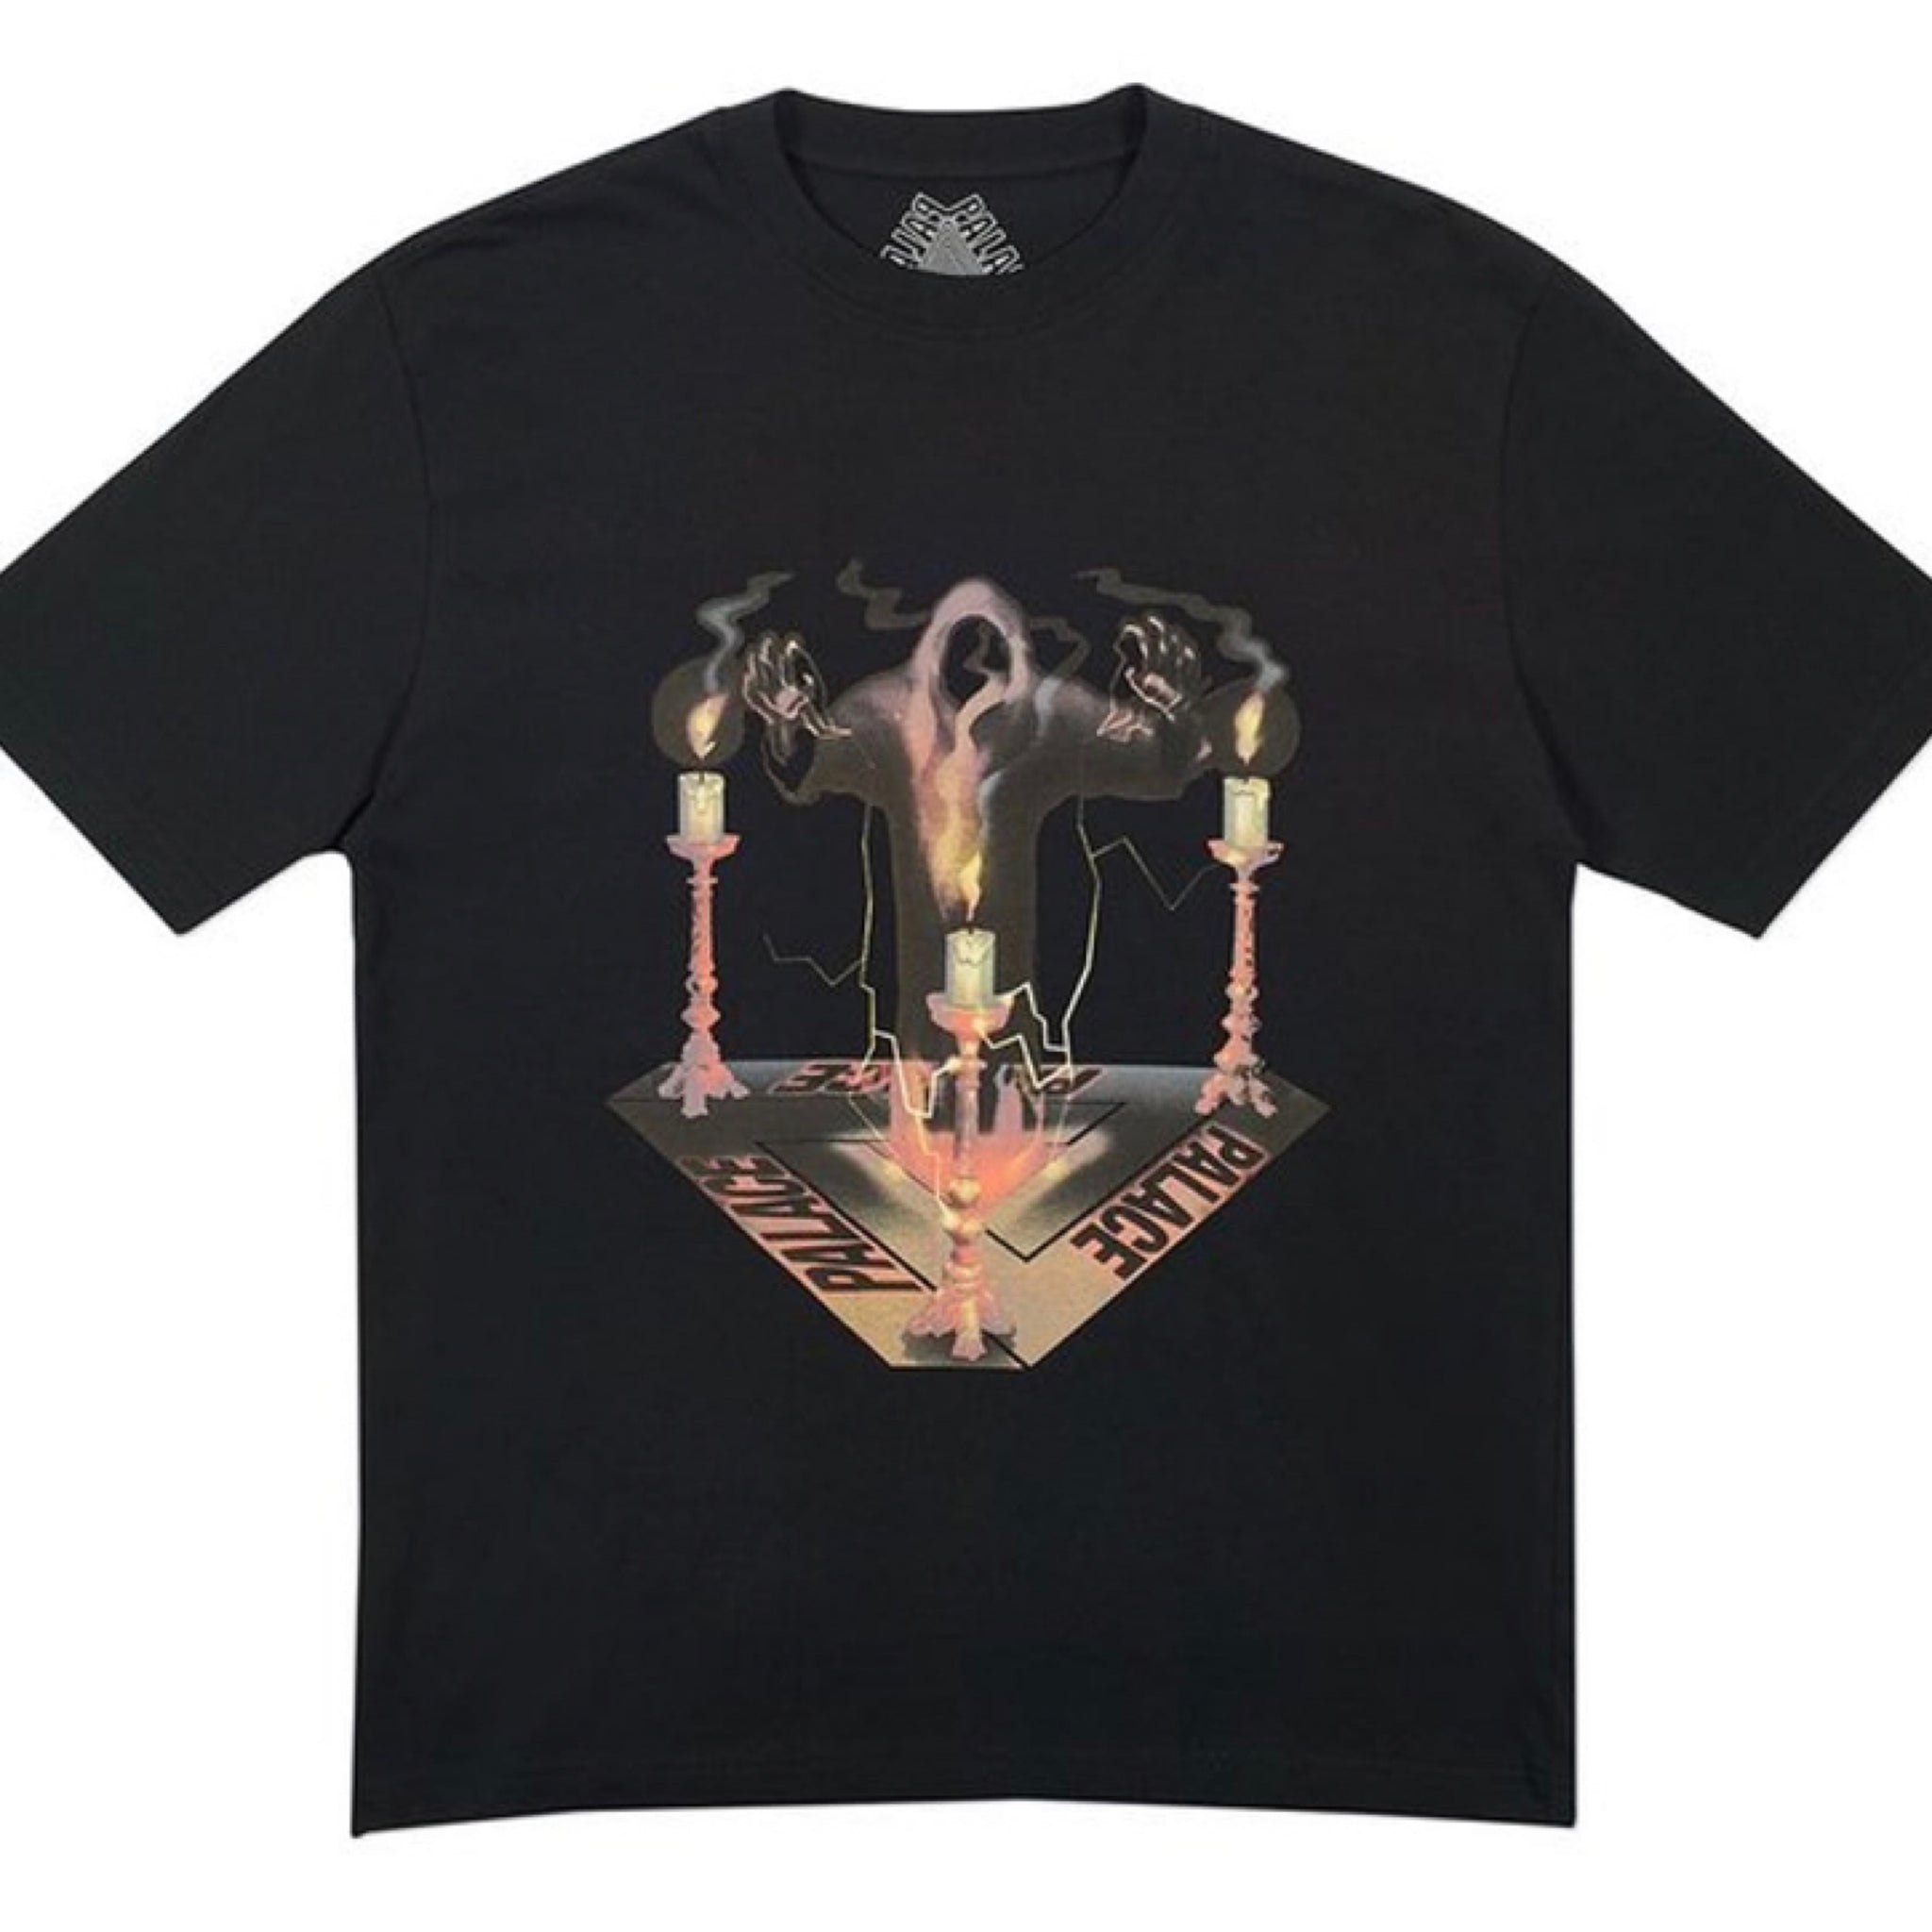 PALACE SKATEBOARDS SPOOKED T-SHIRT